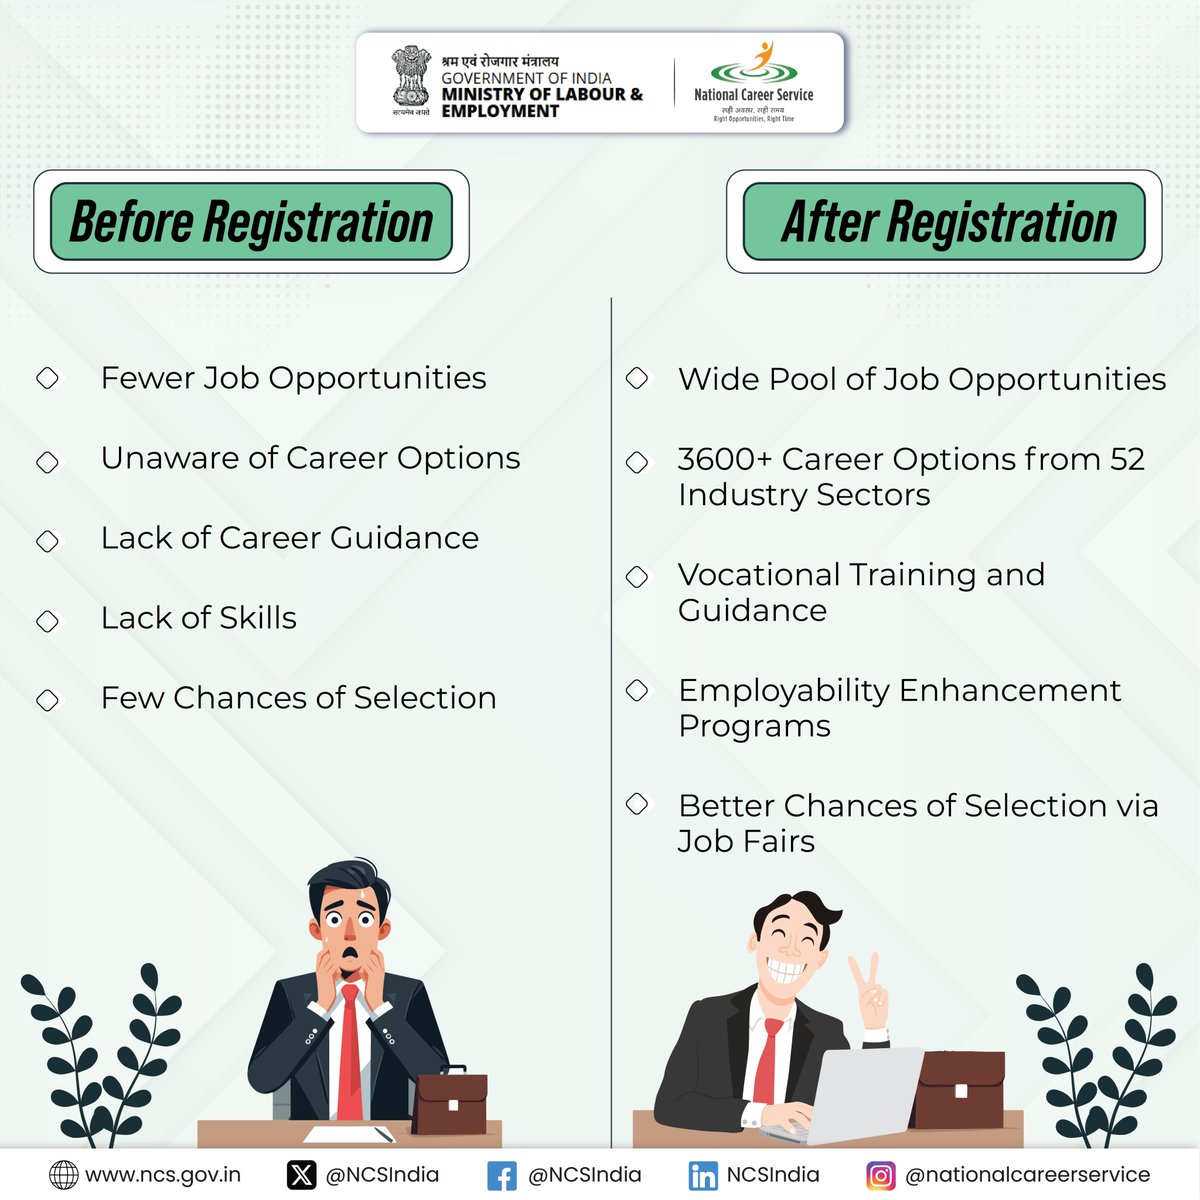 Get vocational training, invite to participate in job fairs, and a lot more by simply registering on the NCS portal

@LabourMinistry @mygovindia

#jobs #CareerOpportunities #NCS #JobFair #RojgaarMela #NCSParRegisterKiyaKya